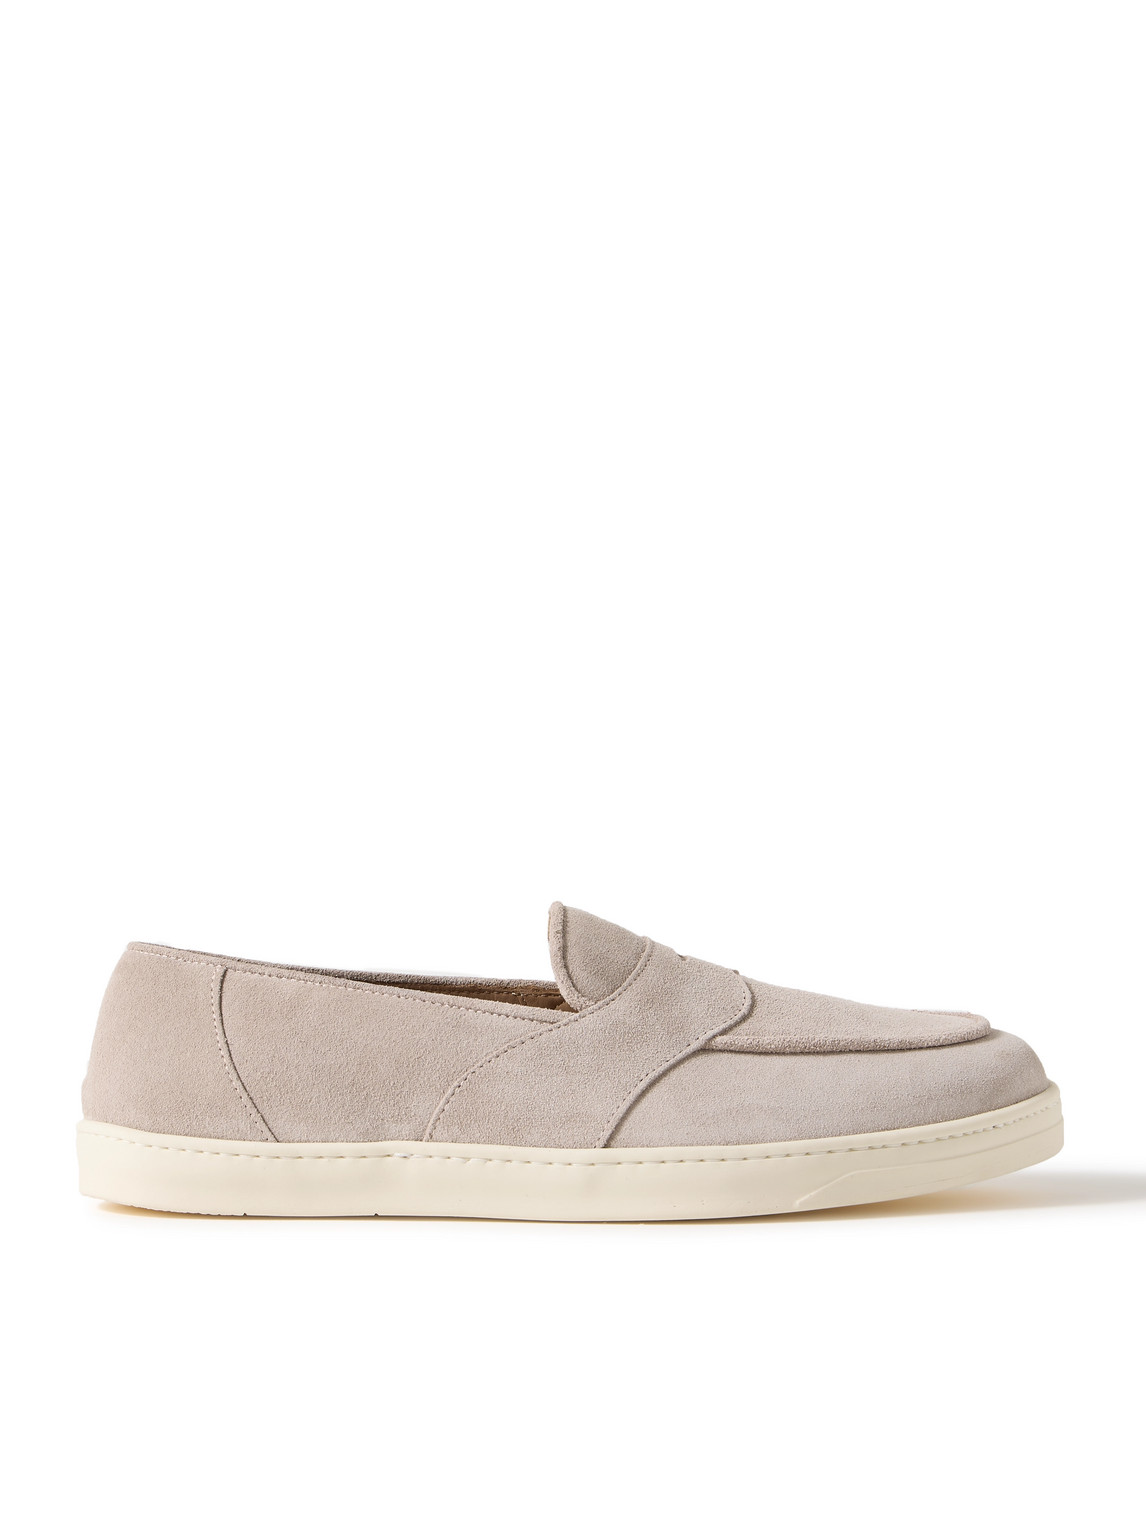 George Cleverley Joey Suede Penny Loafers In Neutrals